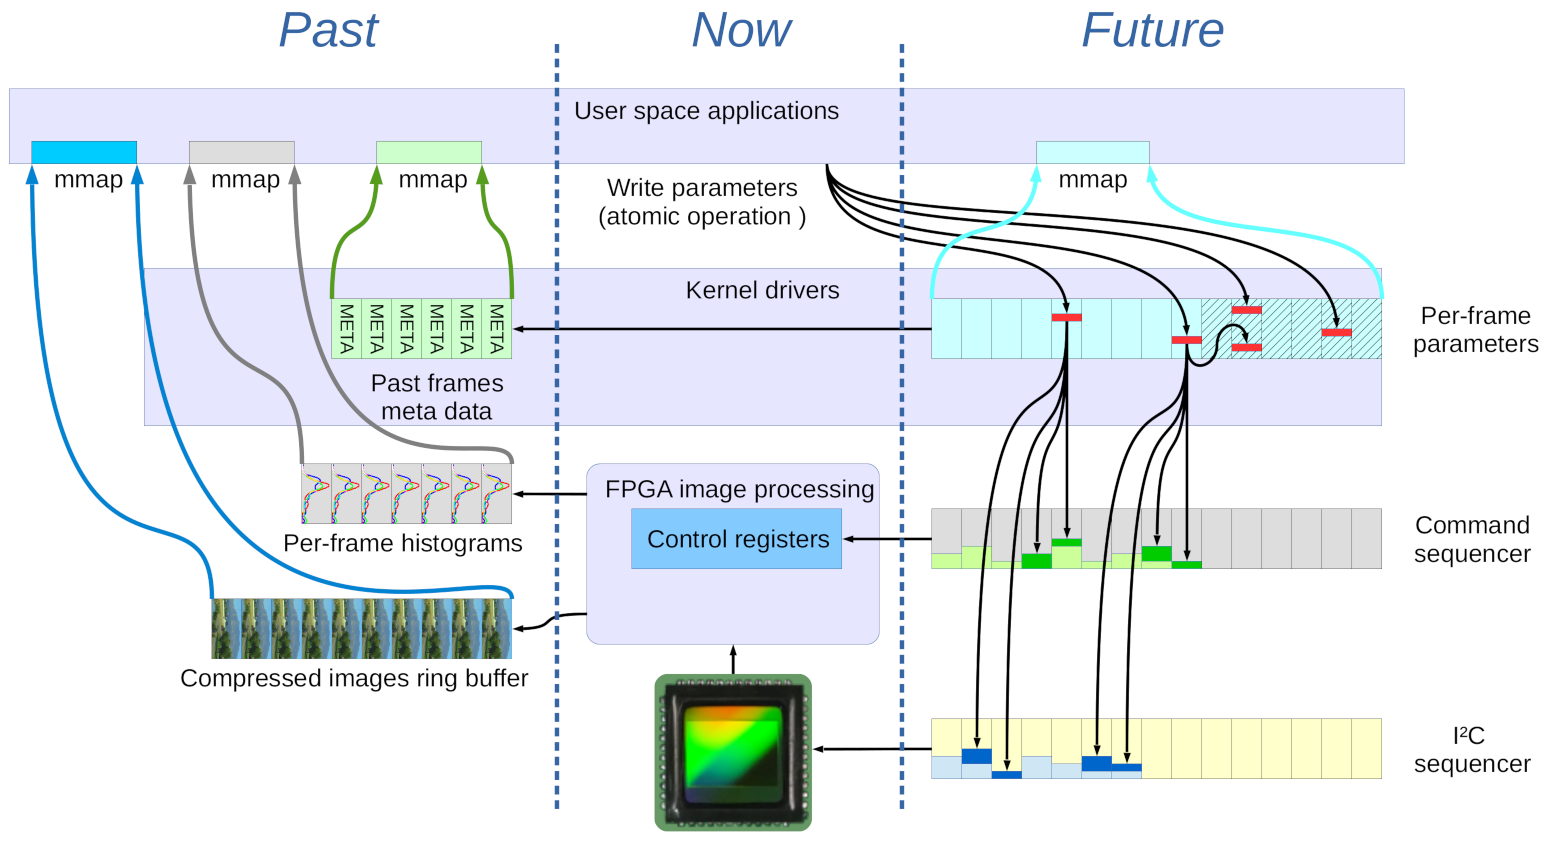 Fig 2. Interaction of the image sensor, FPGA, kernel drivers and user space applications